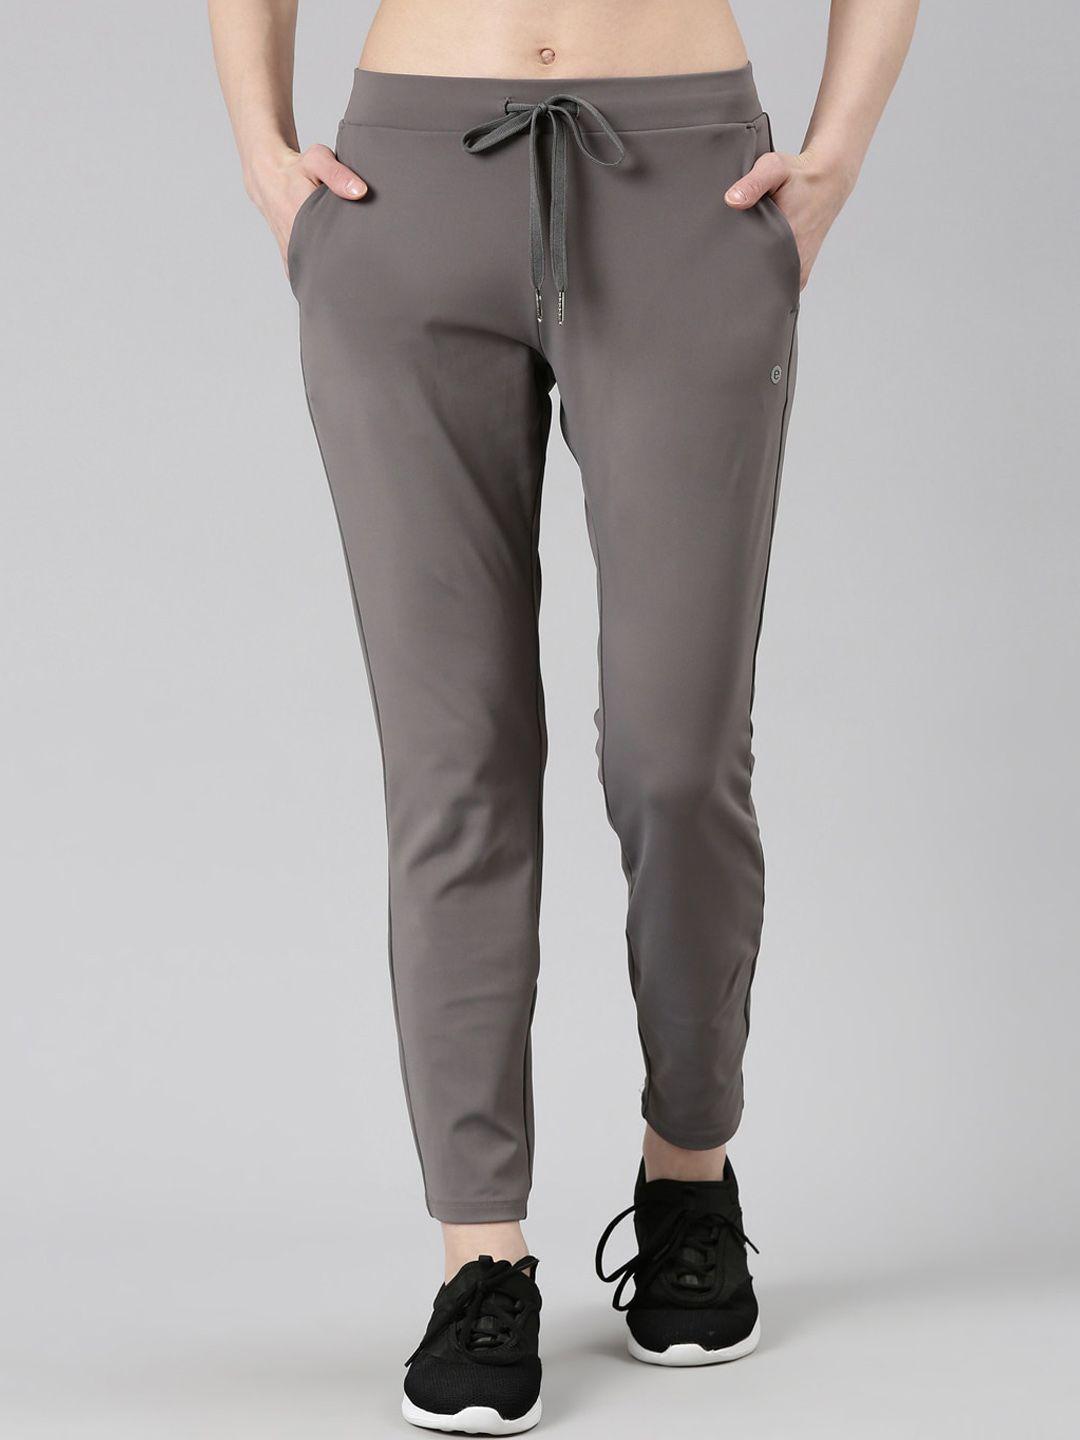 enamor-women-mid-rise-anti-microbial-relaxed-fit-joggers